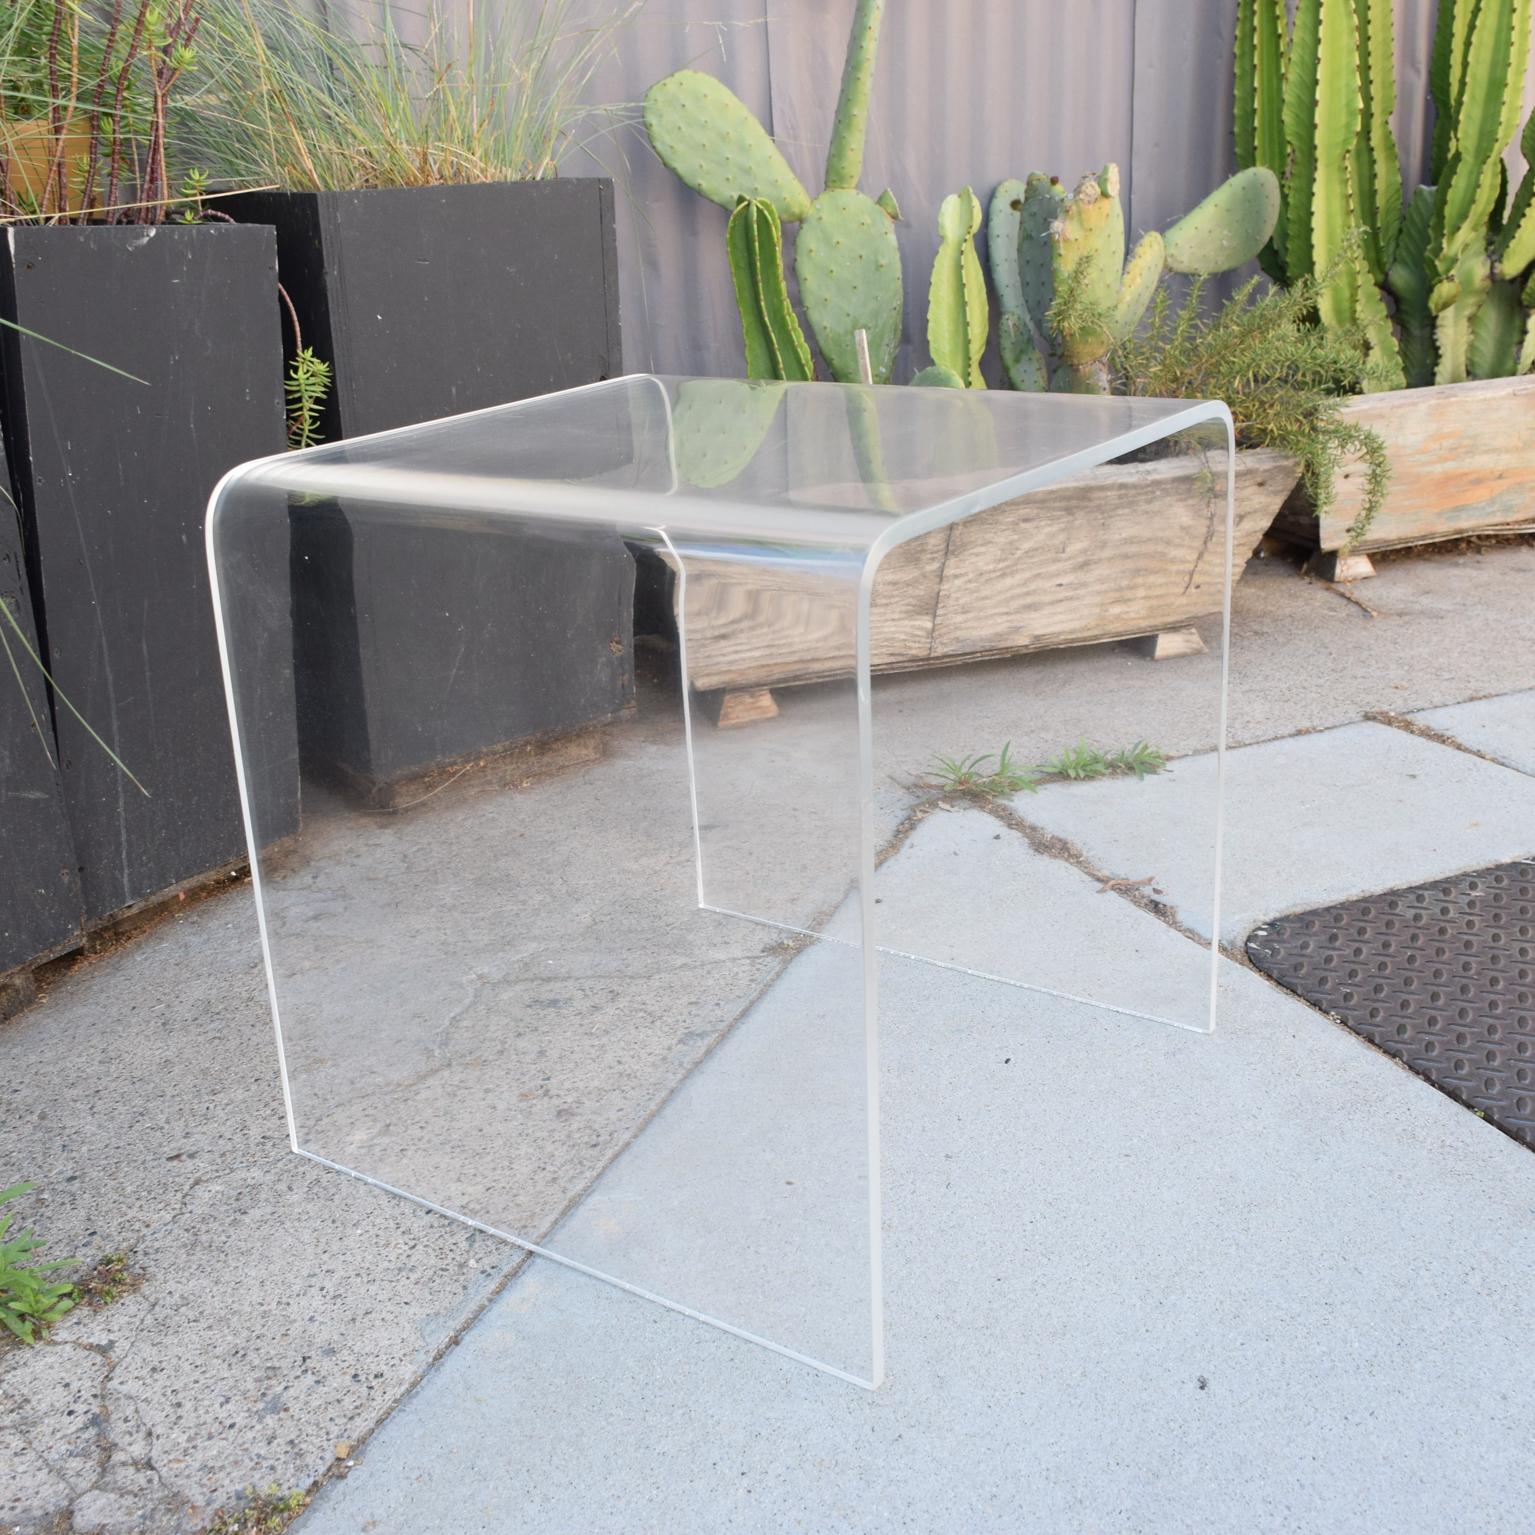 Mid-Century Modern 1970s waterfall Lucite side table attribution Charles Hollis Jones

Design style of the waterfall line features bullnose edges in a thick Lucite. 

No label is apparent, circa 1970s. 

Dimensions: 20 1/4